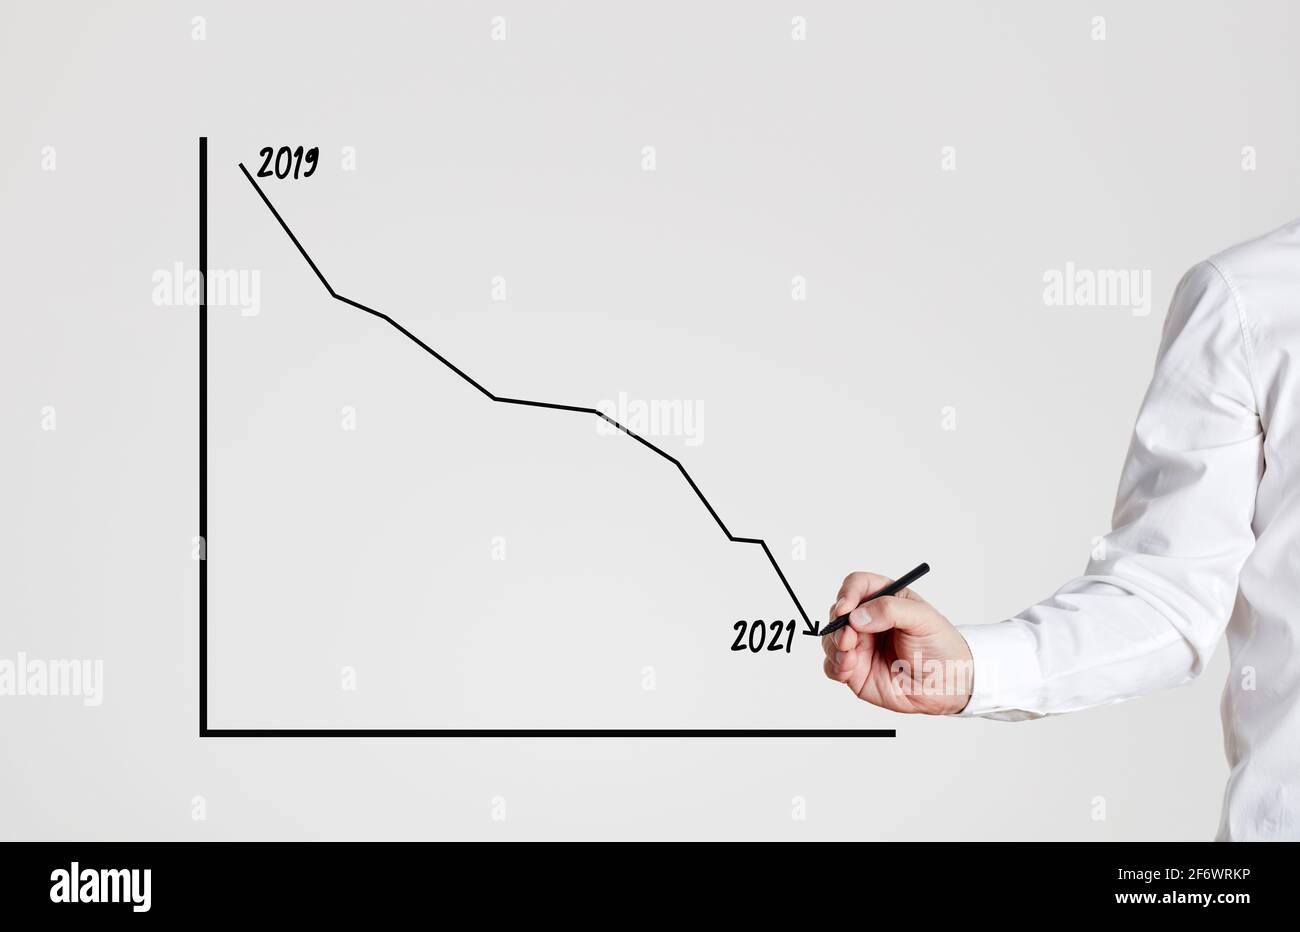 Businessman draws a declining line graph between the years of 2019 and 2021. Negative financial impact of coronavirus pandemic on economy and business Stock Photo